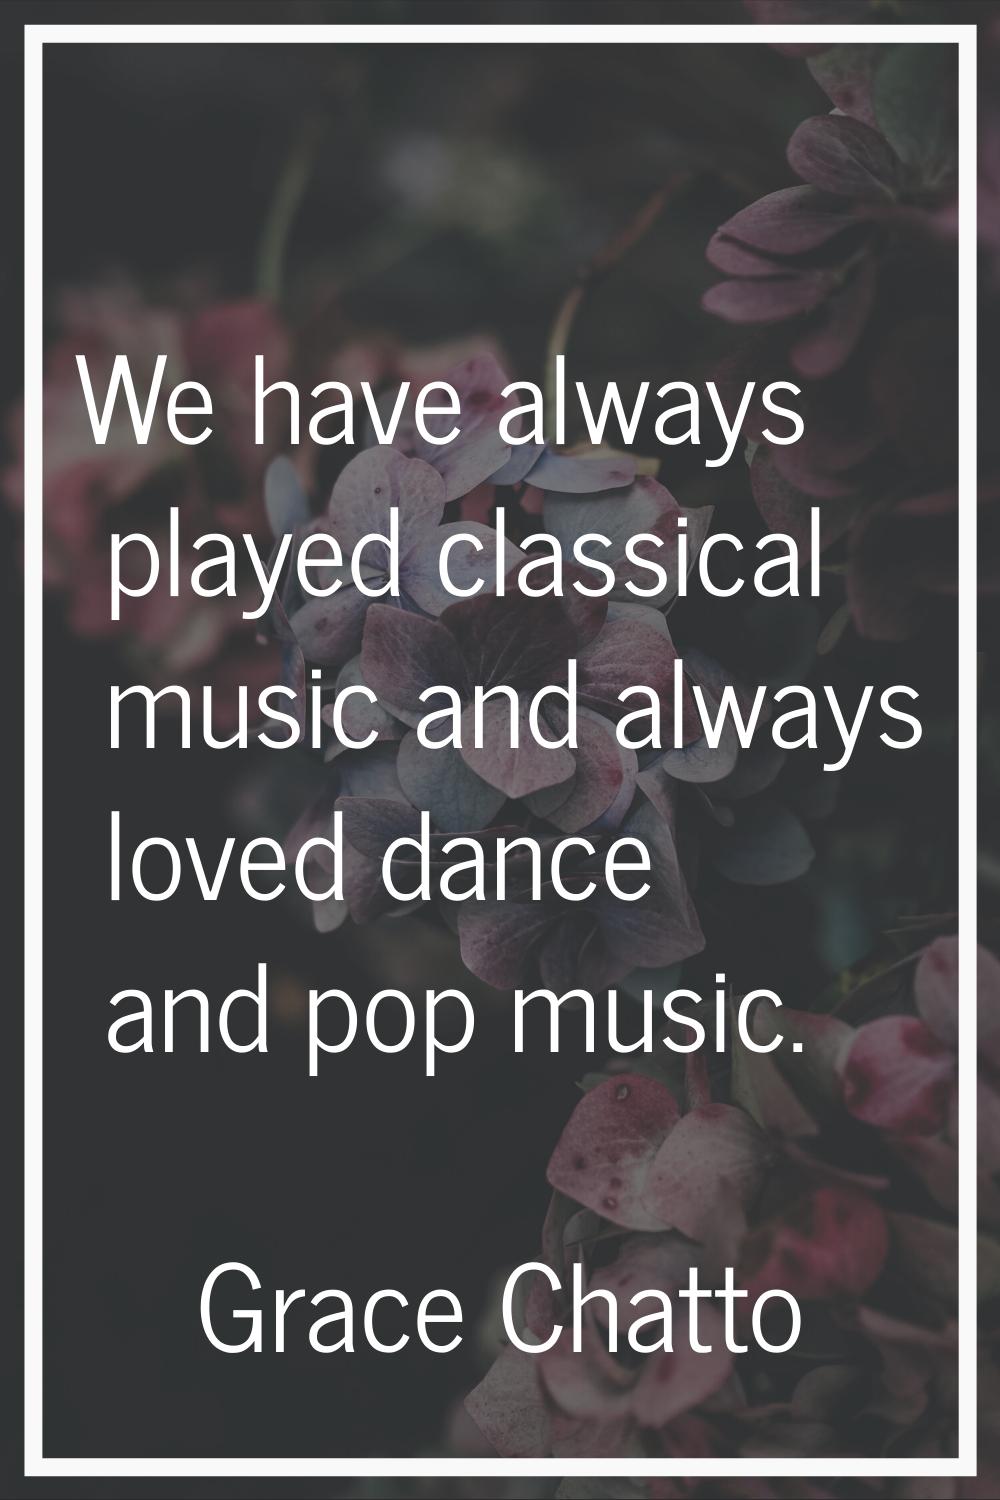 We have always played classical music and always loved dance and pop music.